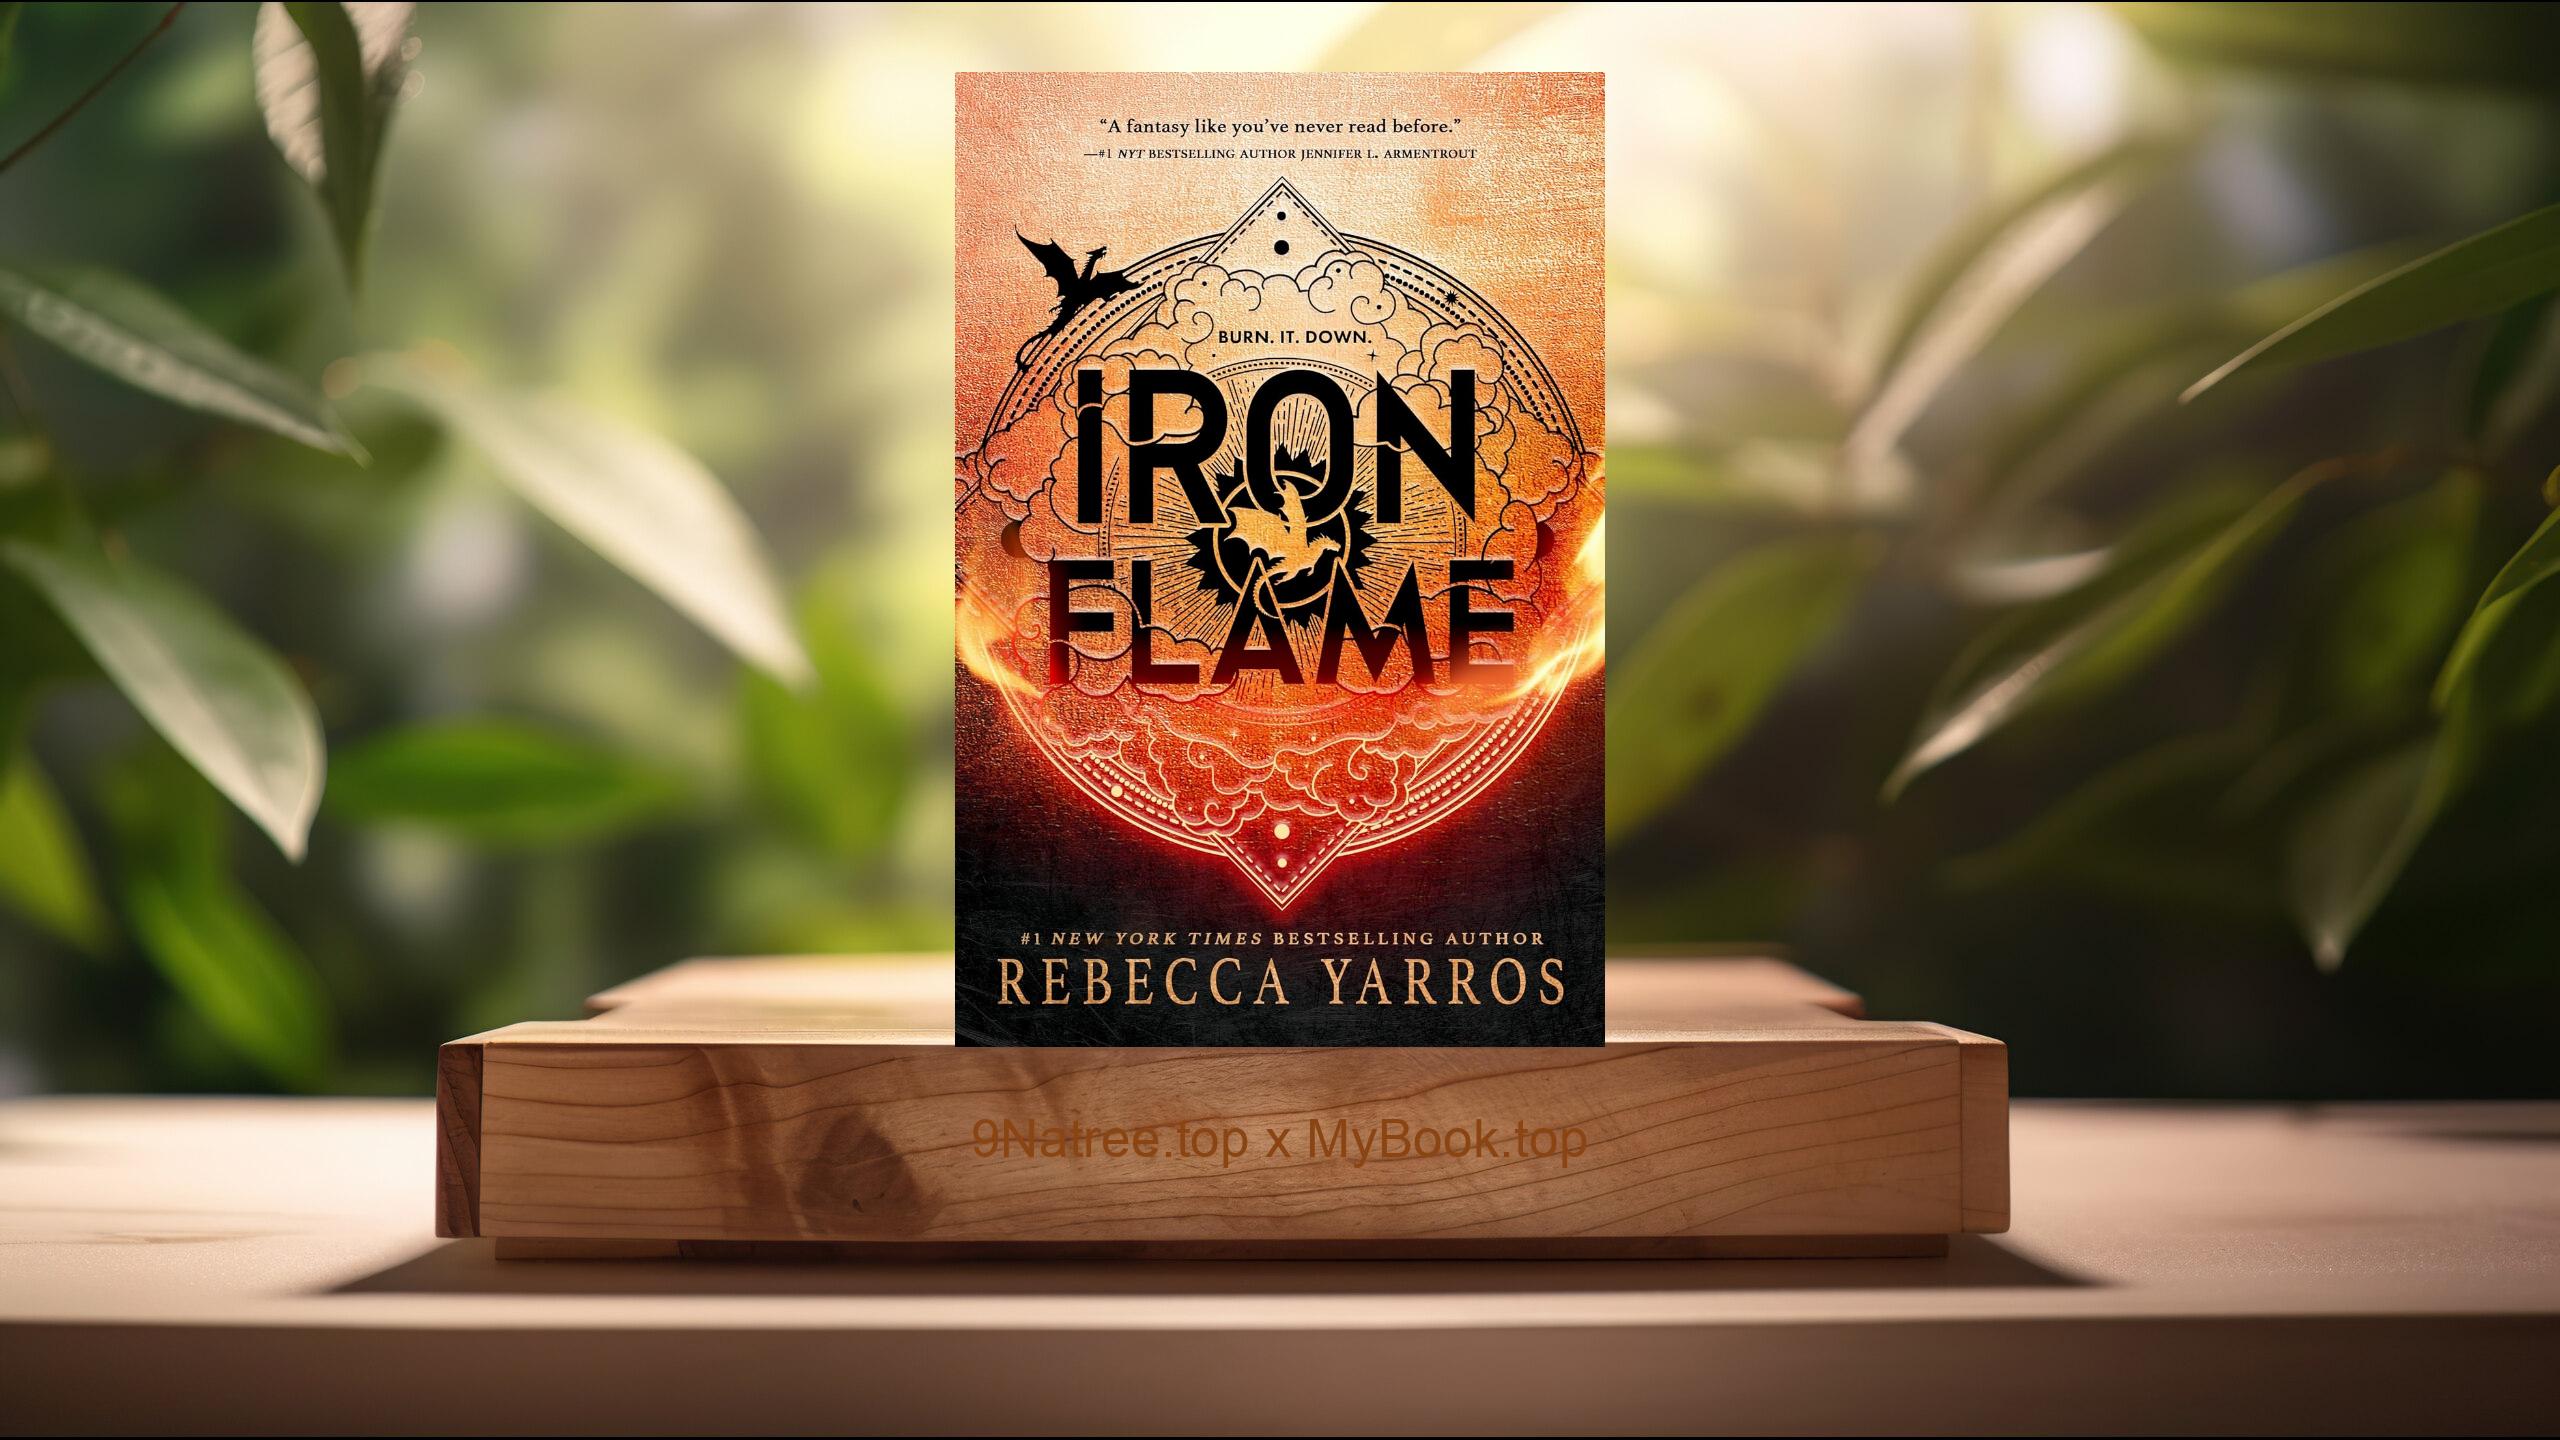 [Review] Iron Flame  (Rebecca Yarros) Summarized